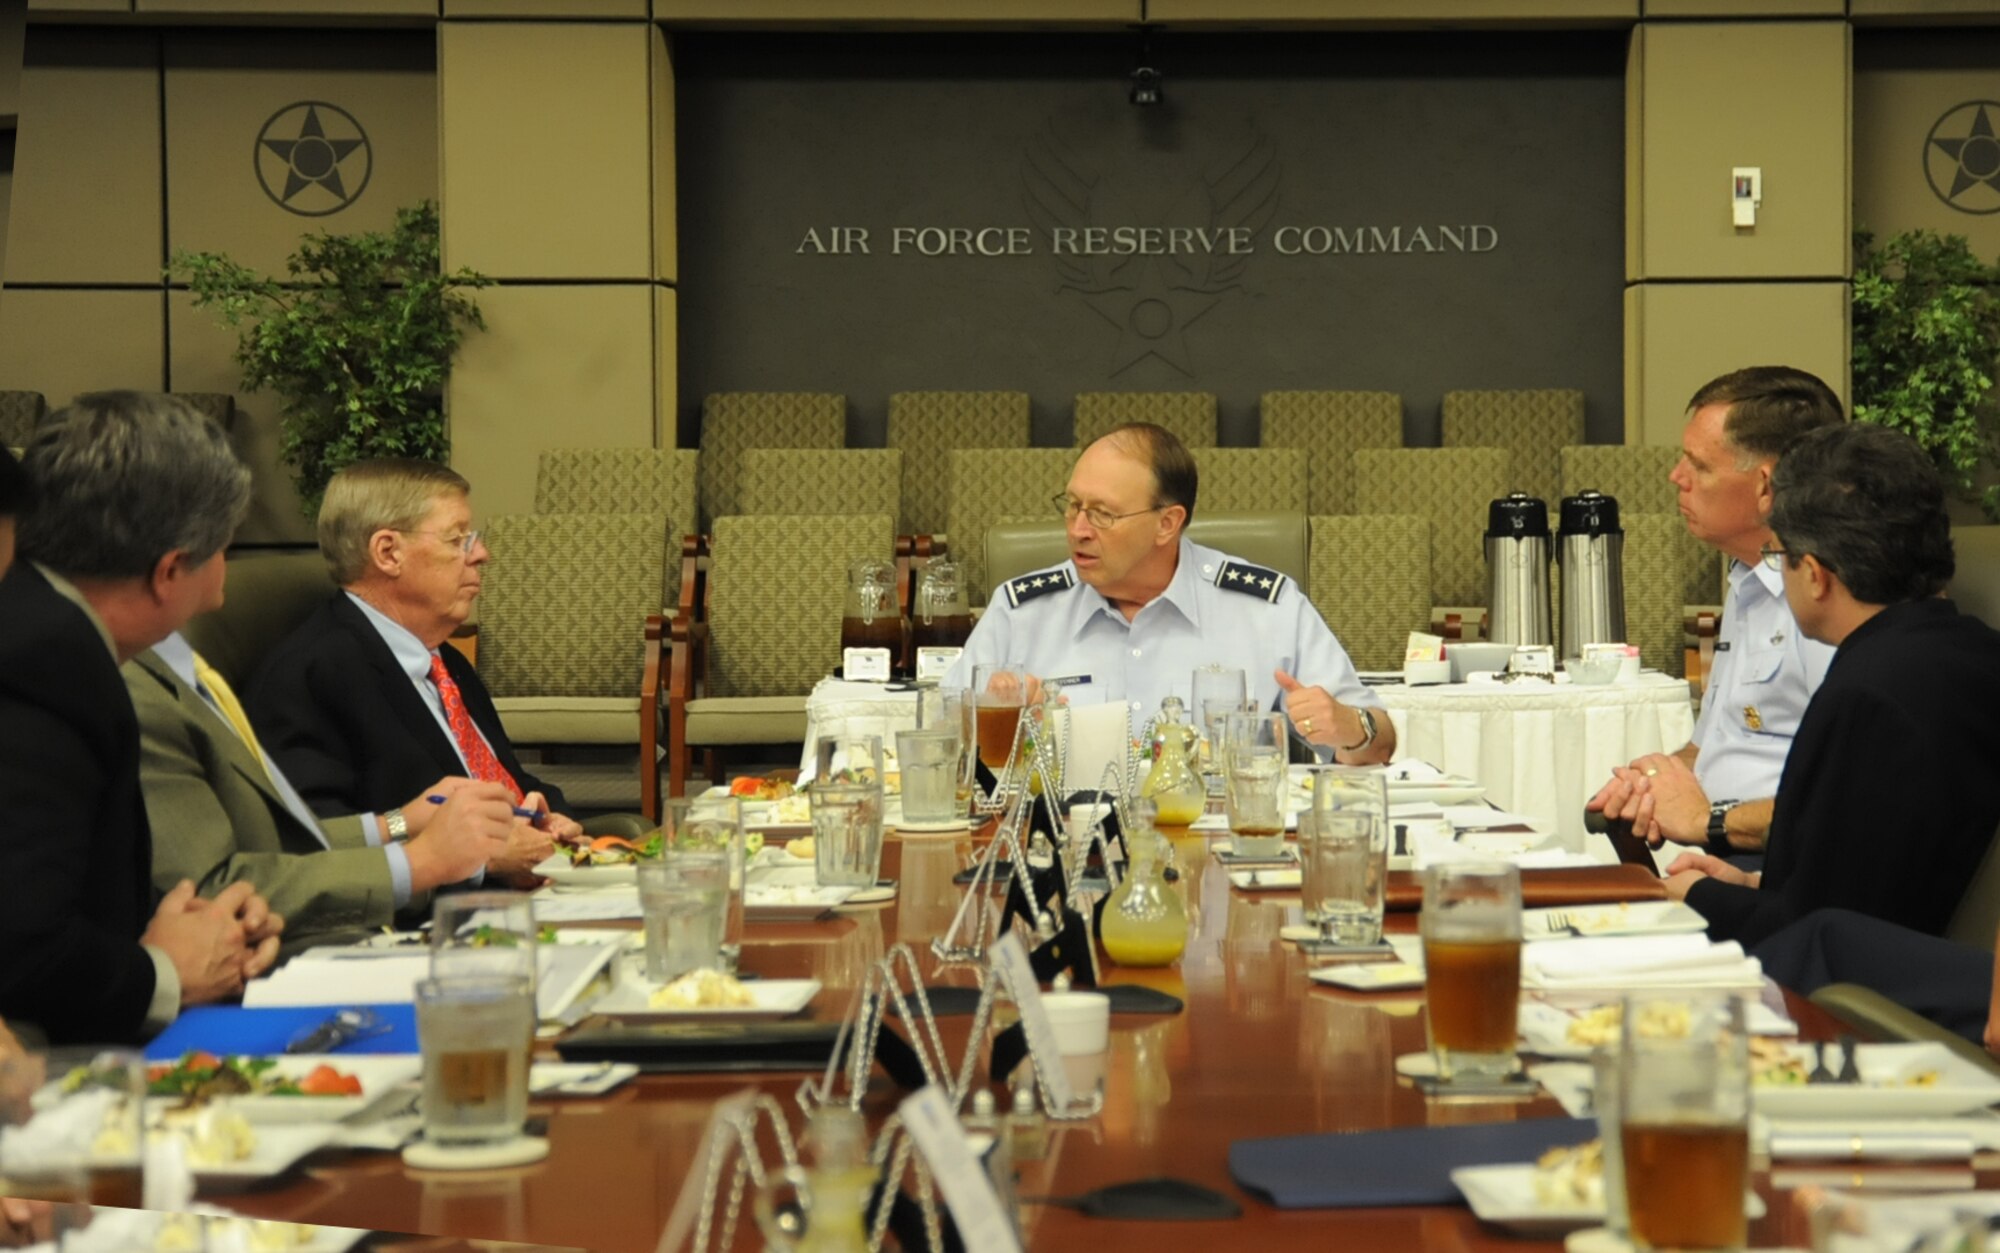 Lt. Gen. Charles E. Stenner Jr. talks with Sen. Johnny Isakson (R-GA), left, during the senator's visit to Headquarters AFRC May 14, 2011. The AFRC commander shared his vision of "Total Force 21," a recommendation to right-size the command to meet growing requirements and shrinking budgets. (U.S. Air Force photo/Raymond Crayton Jr.)